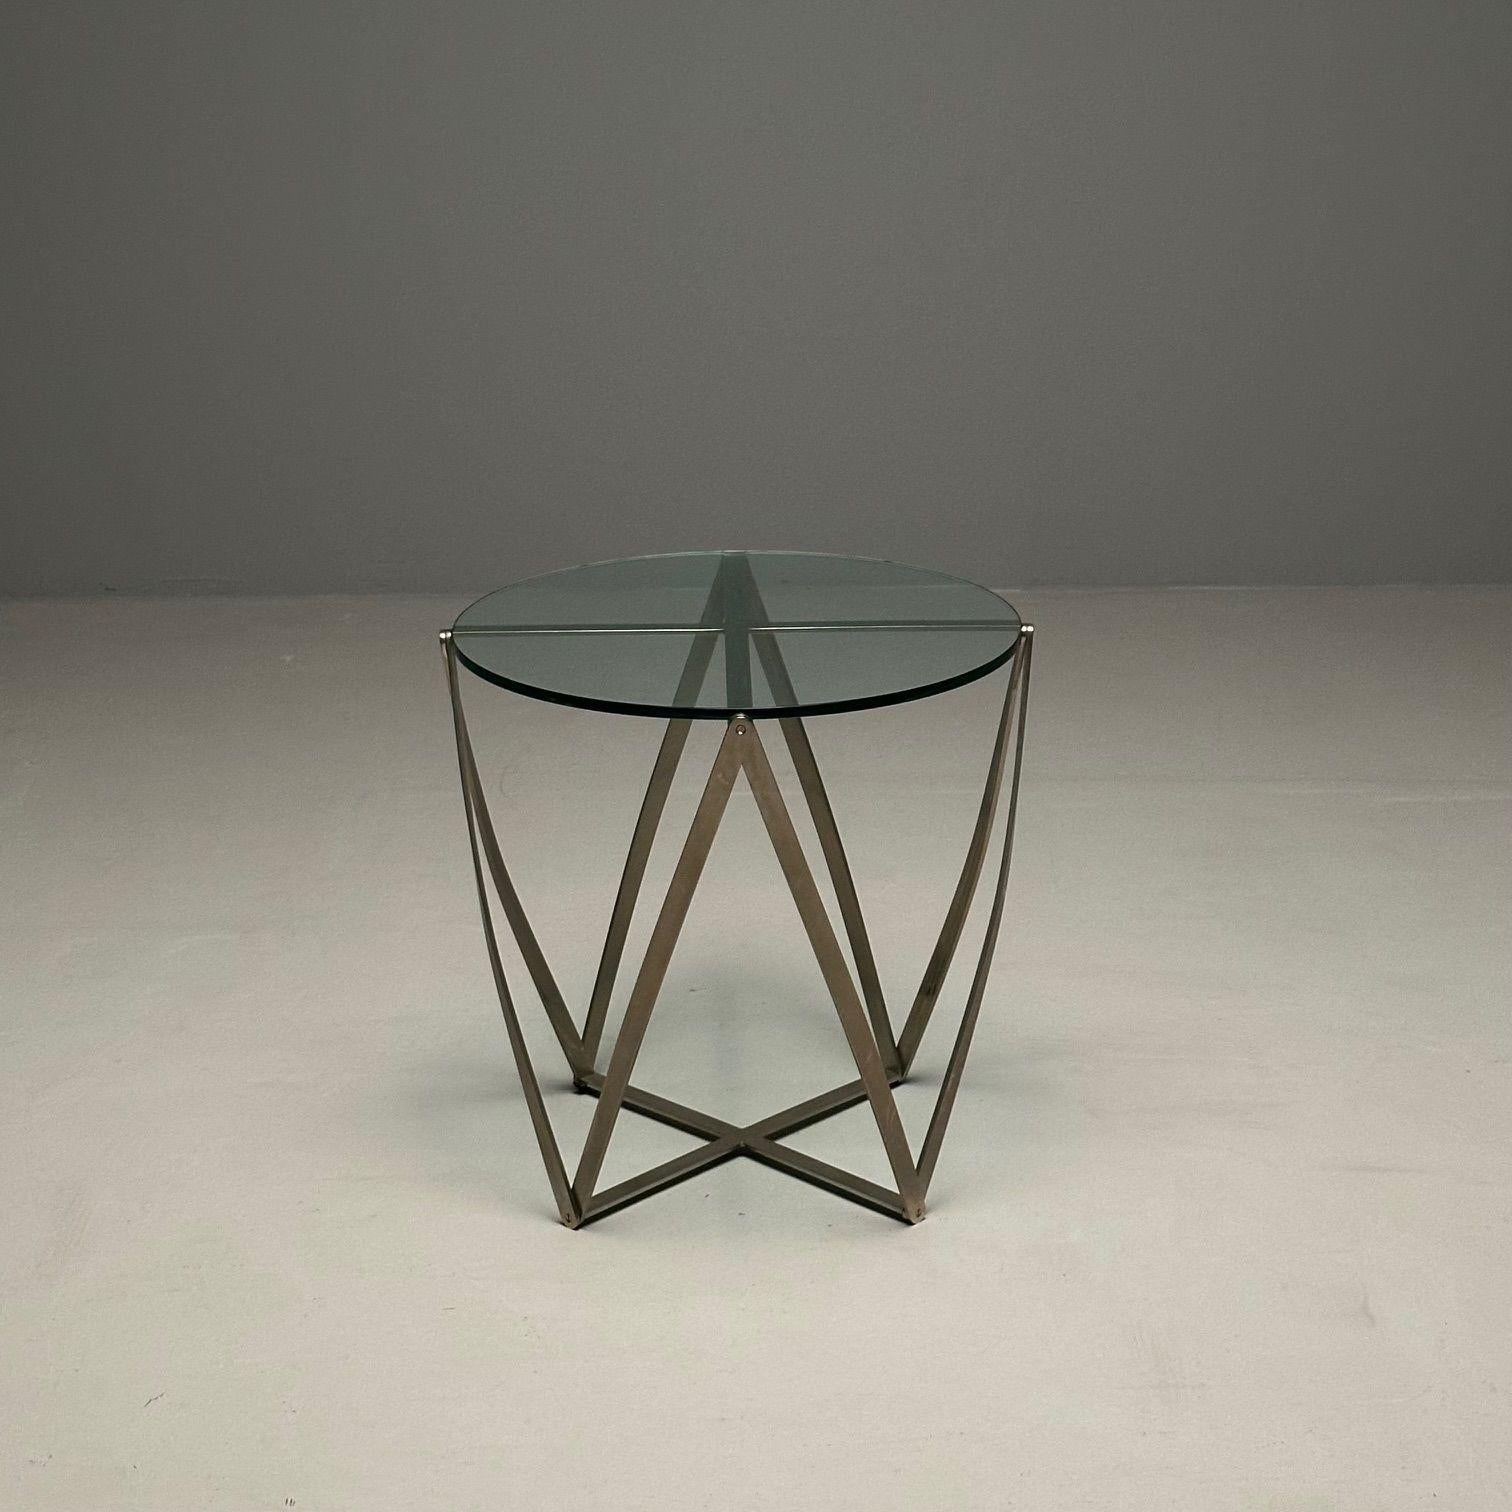 American Circular Mid-Century Modern Aluminum Side / End Table by John Vesey, Sculptural